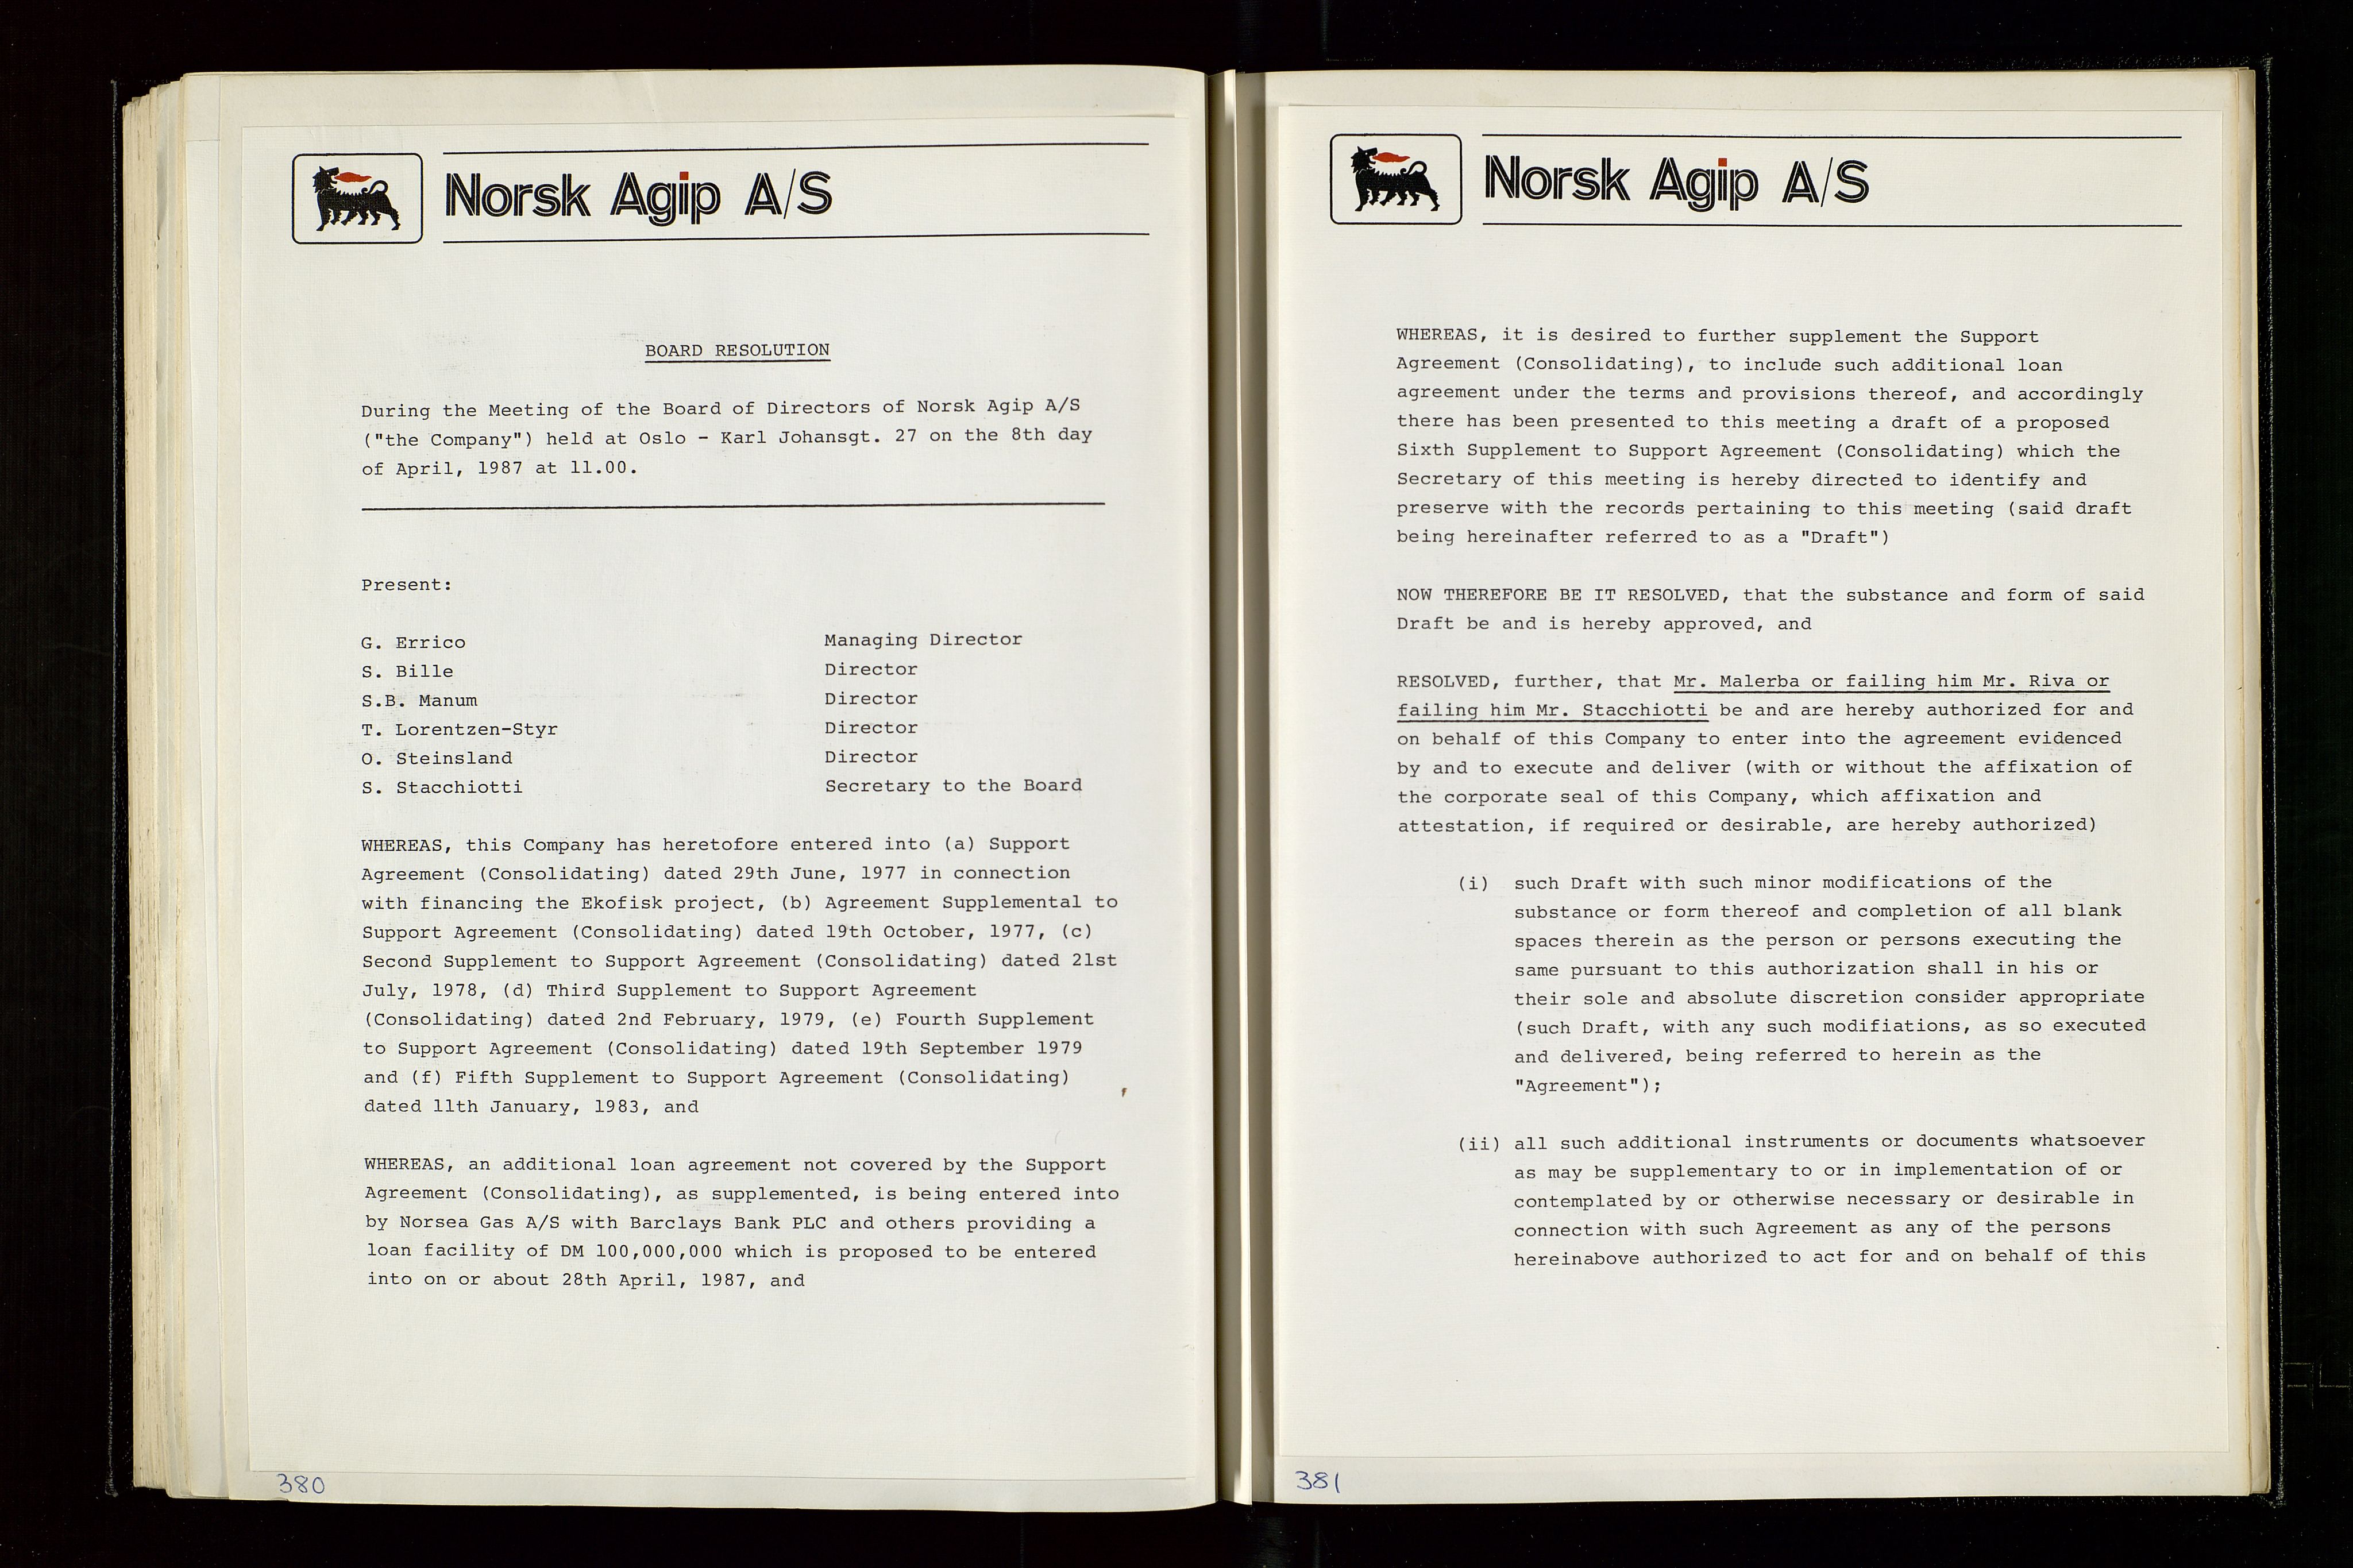 Pa 1583 - Norsk Agip AS, SAST/A-102138/A/Aa/L0003: Board of Directors meeting minutes, 1979-1983, s. 380-381